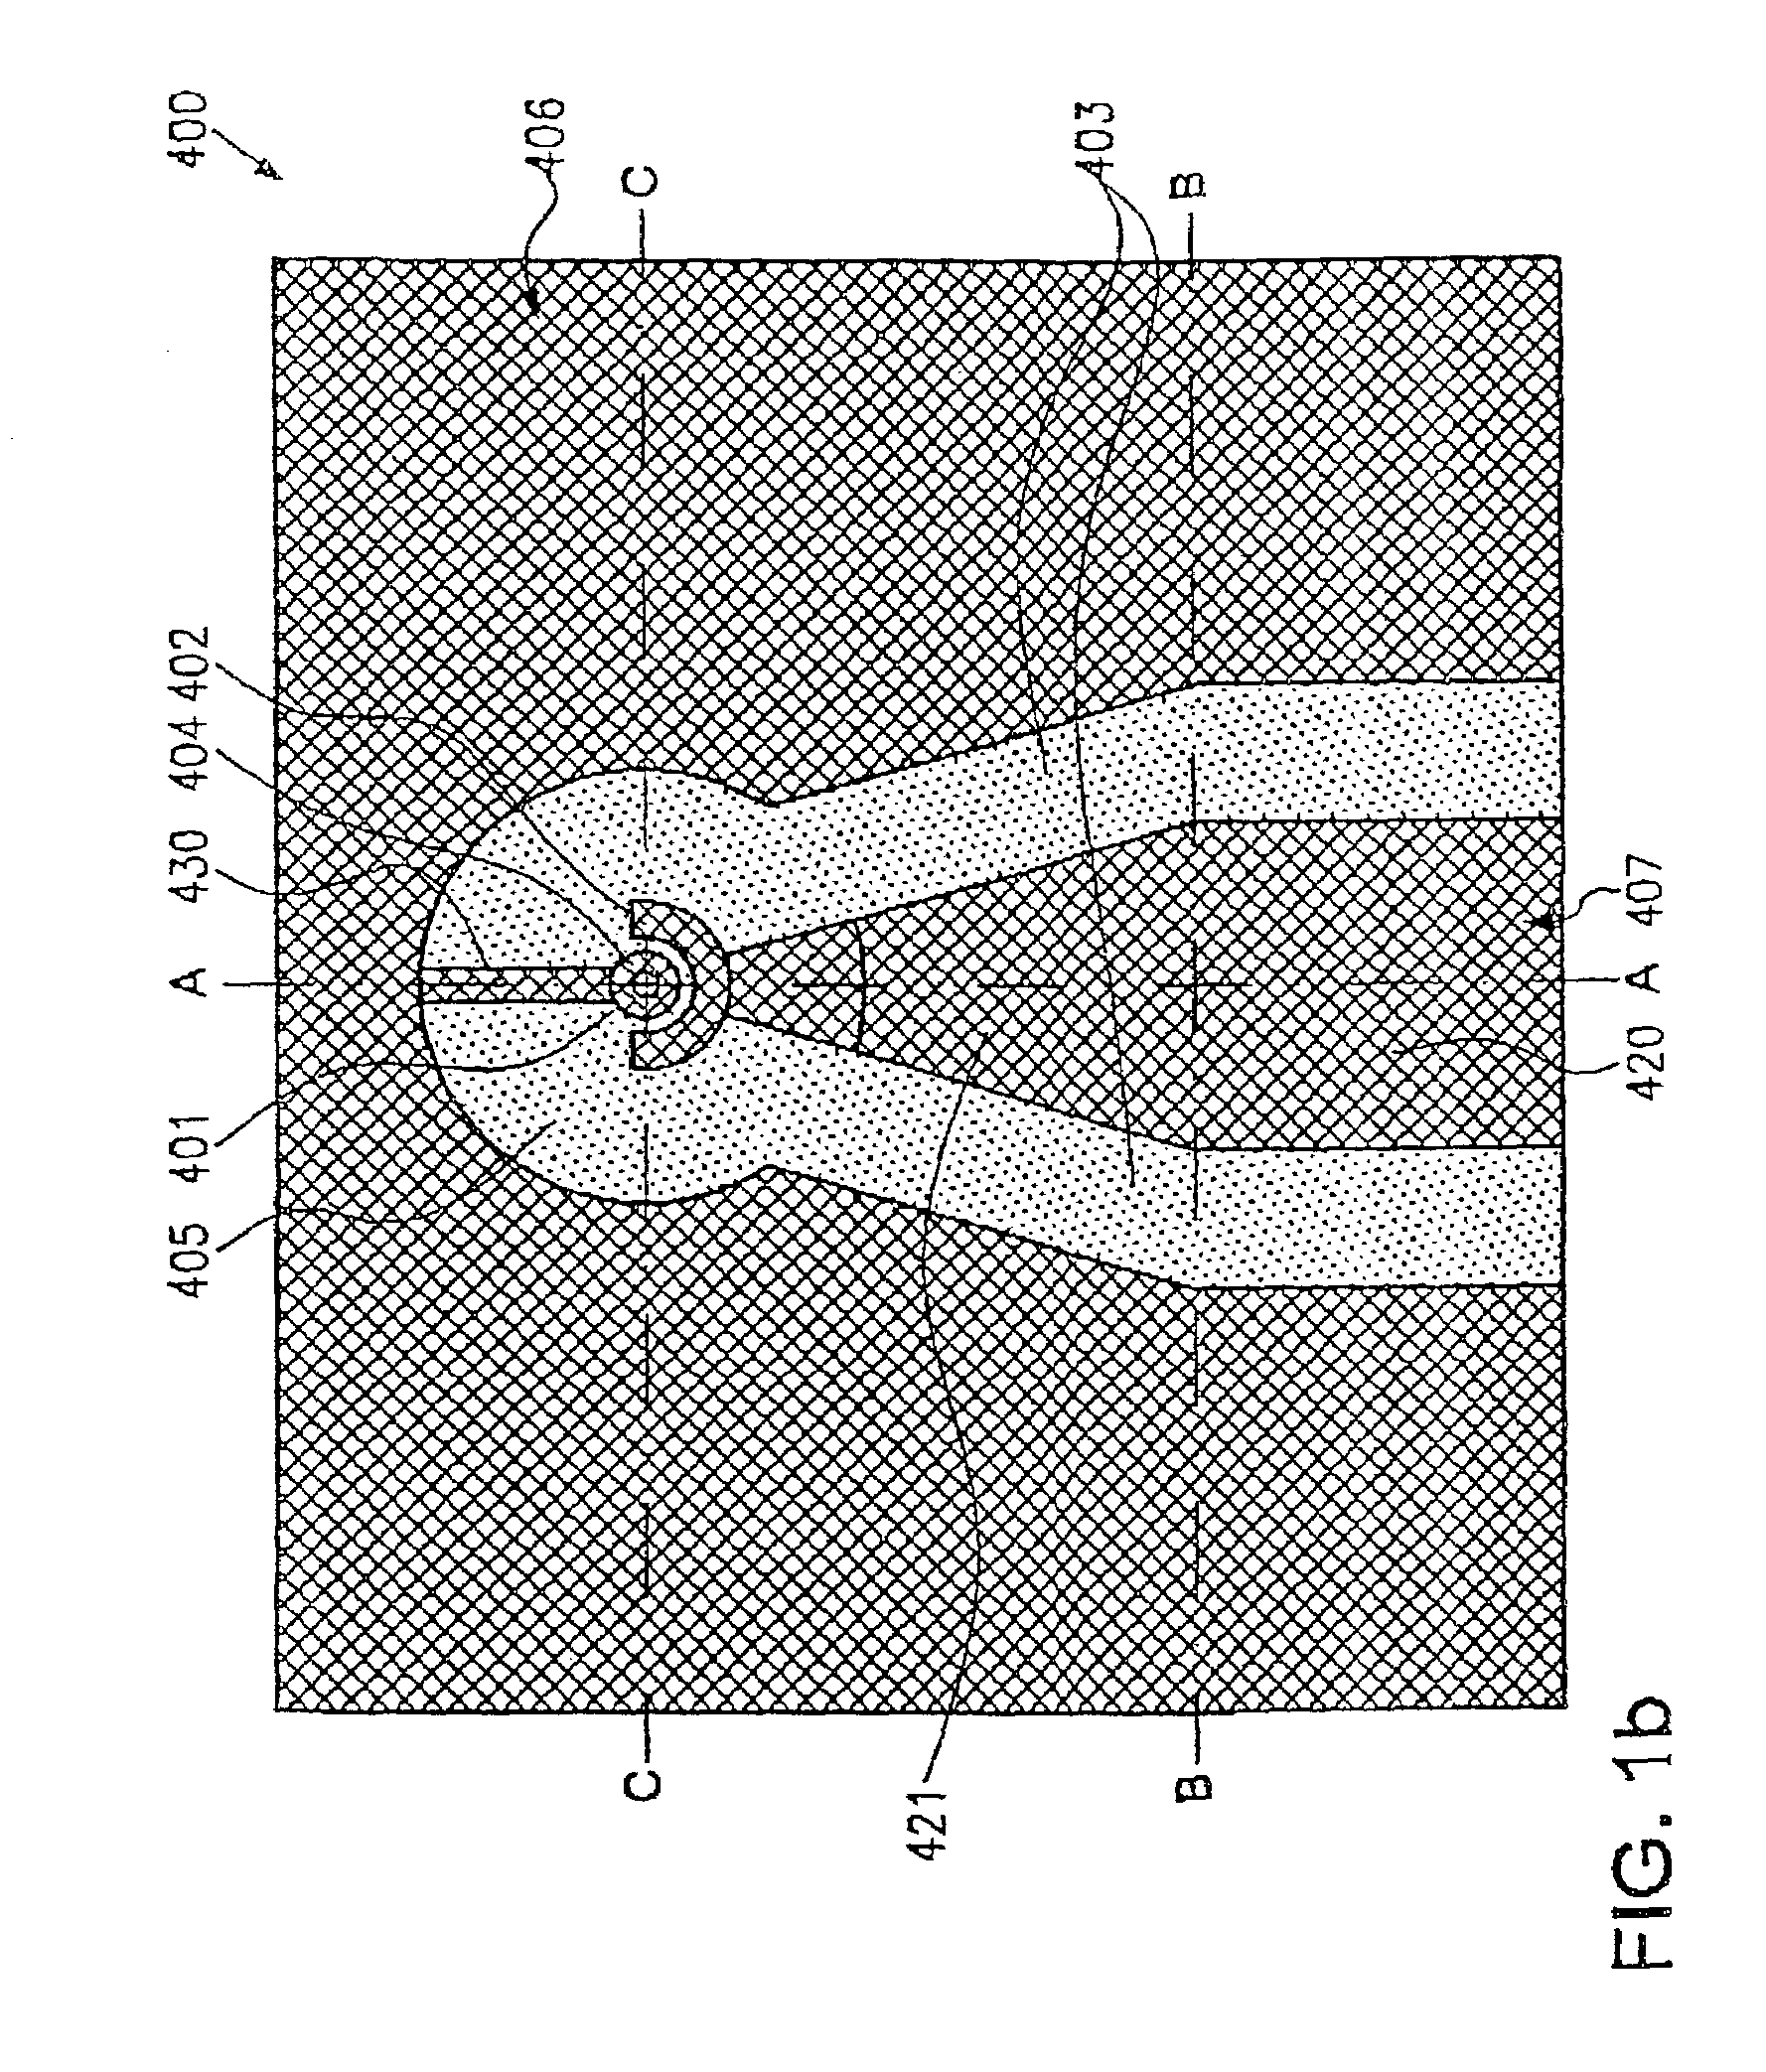 High speed vertical cavity surface emitting laser device (VCSEL) with low parasitic capacitance